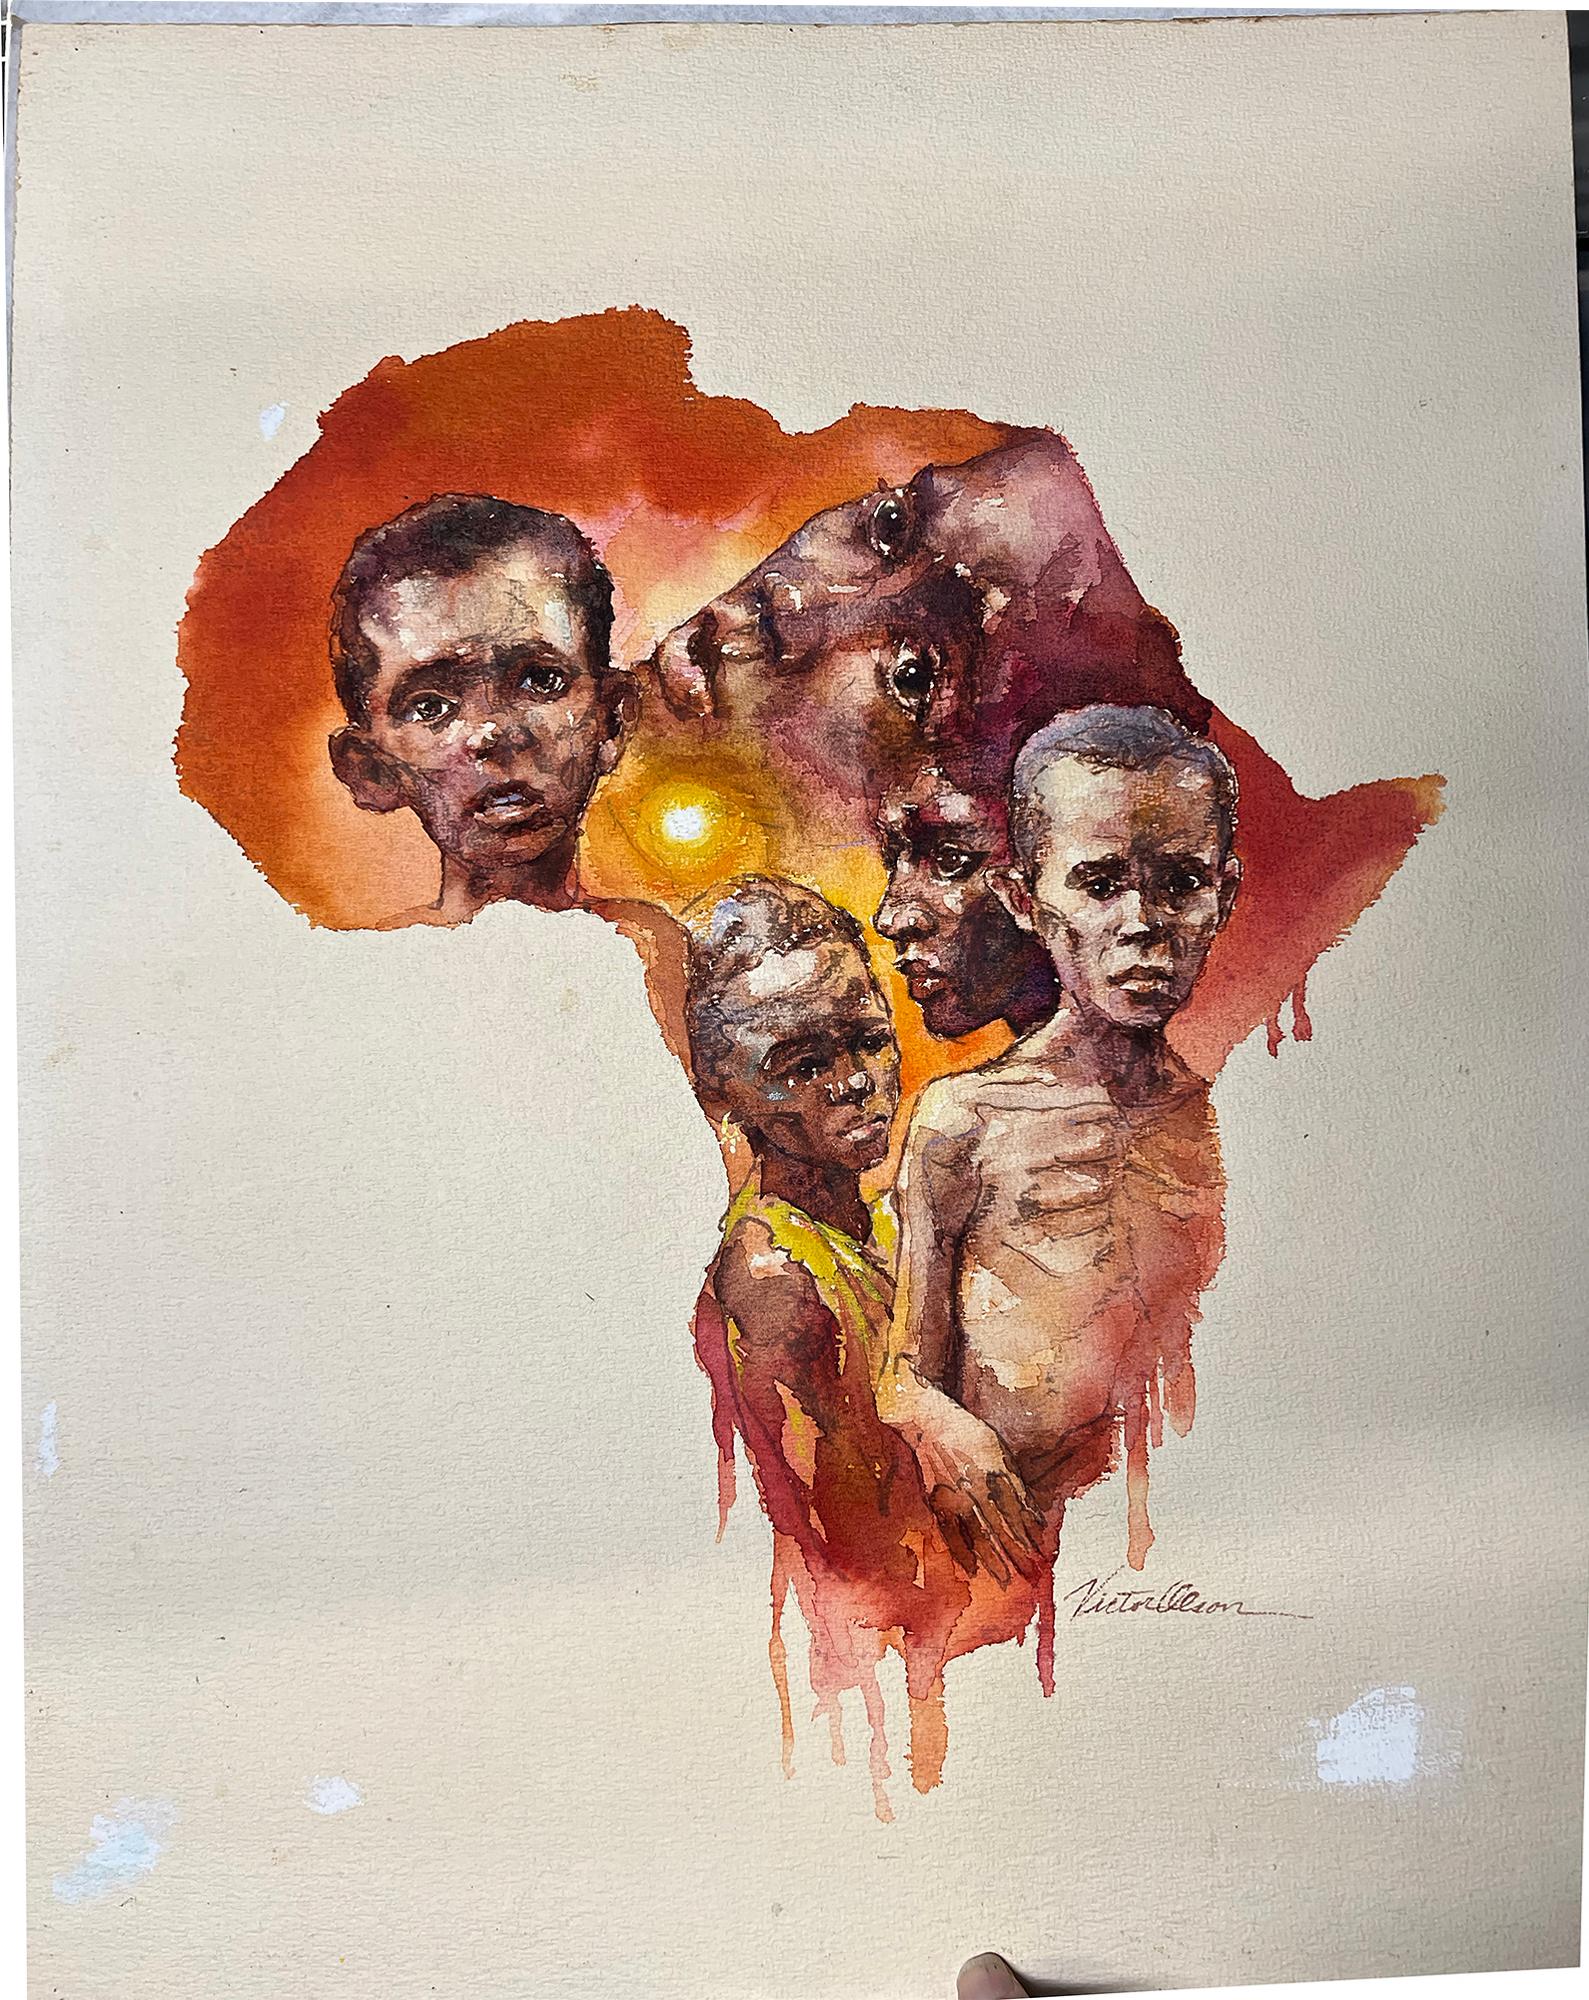 African Children Suffer Famine and Despair in Hot Colors - Africa is Bleeding   - Realist Art by Victor Olson